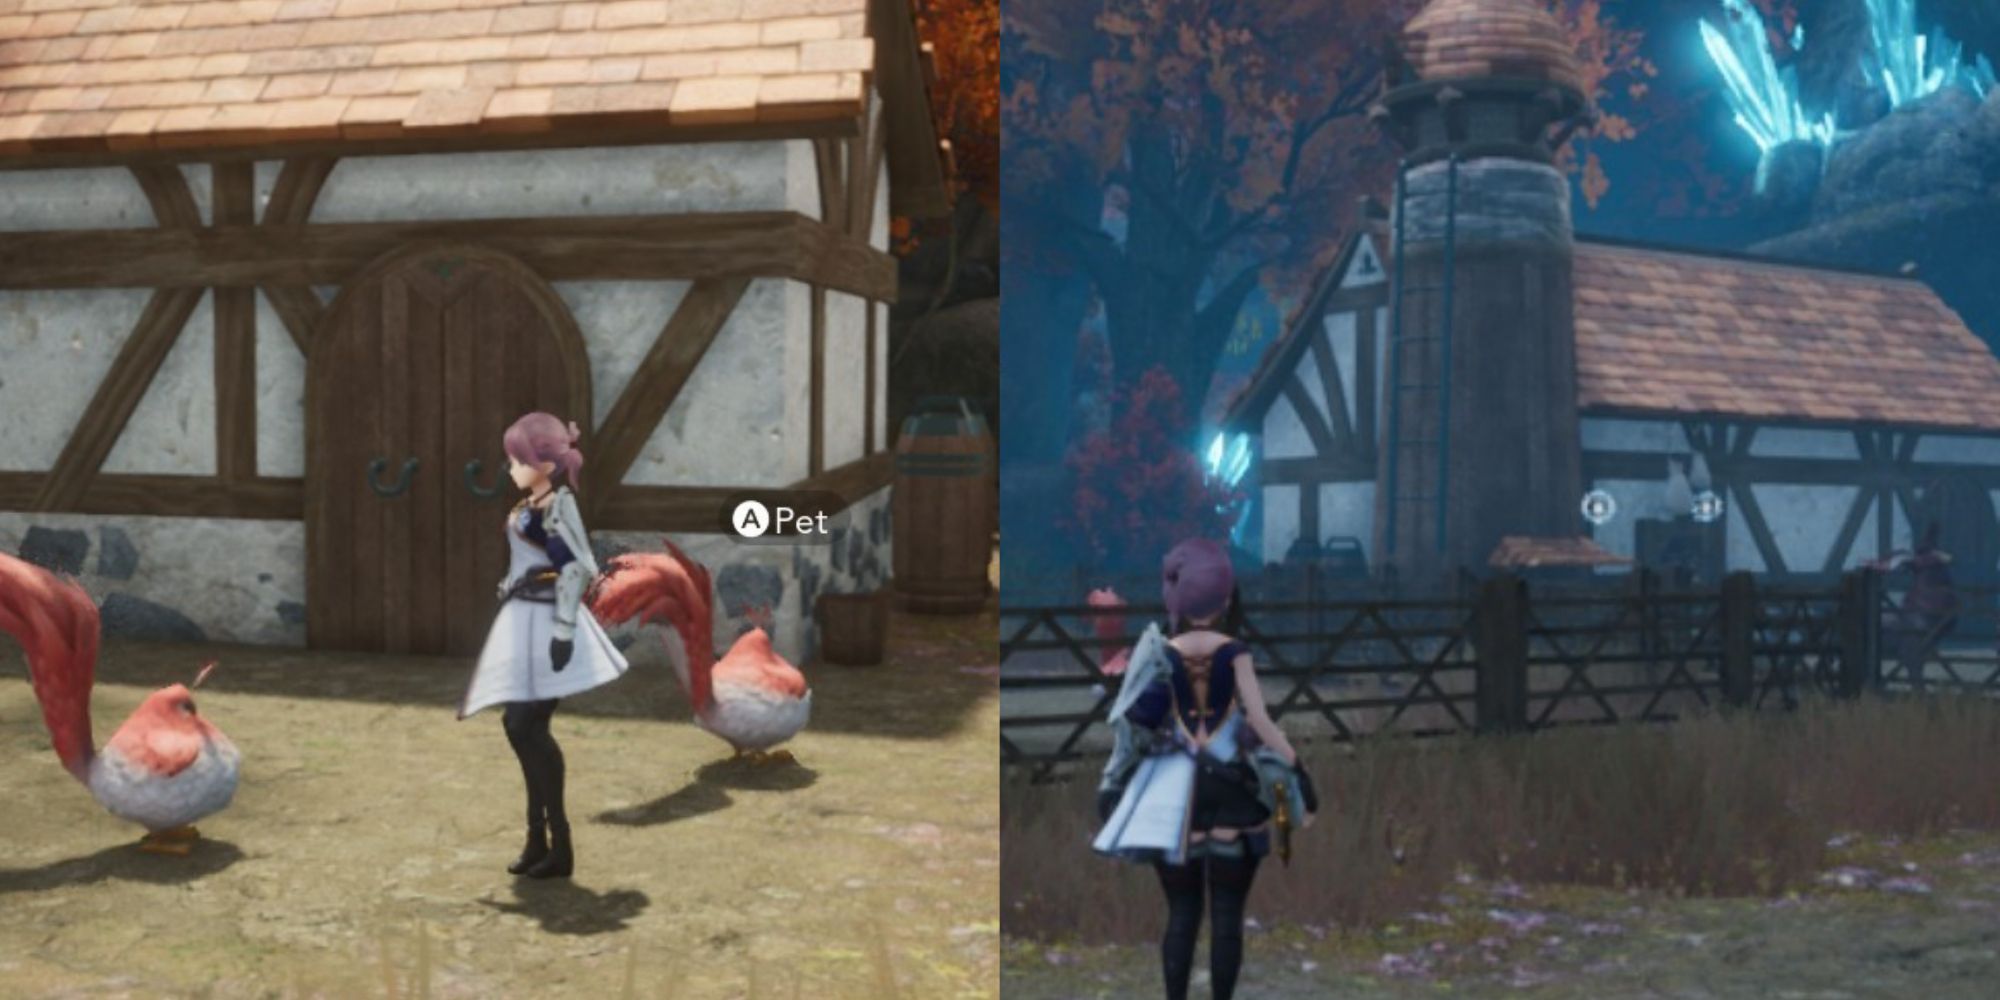 Split image screenshots of the Harvestella player character with Cluffowl and outside the Woolum pen.